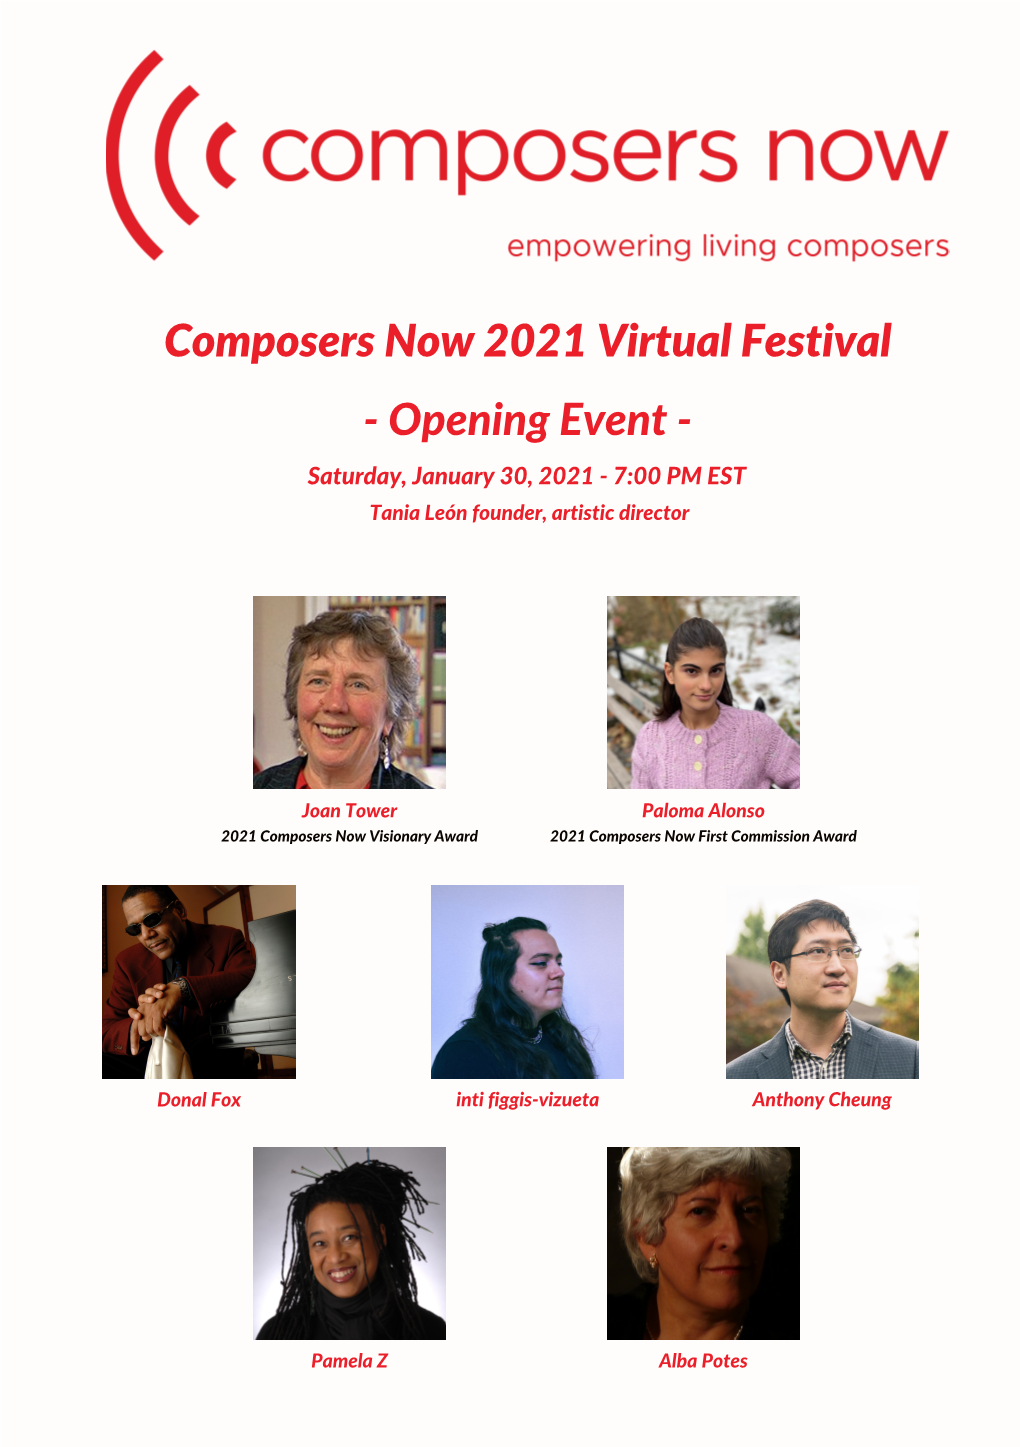 Composers Now 2021 Virtual Festival - Opening Event - Saturday, January 30, 2021 - 7:00 PM EST Tania León Founder, Artistic Director